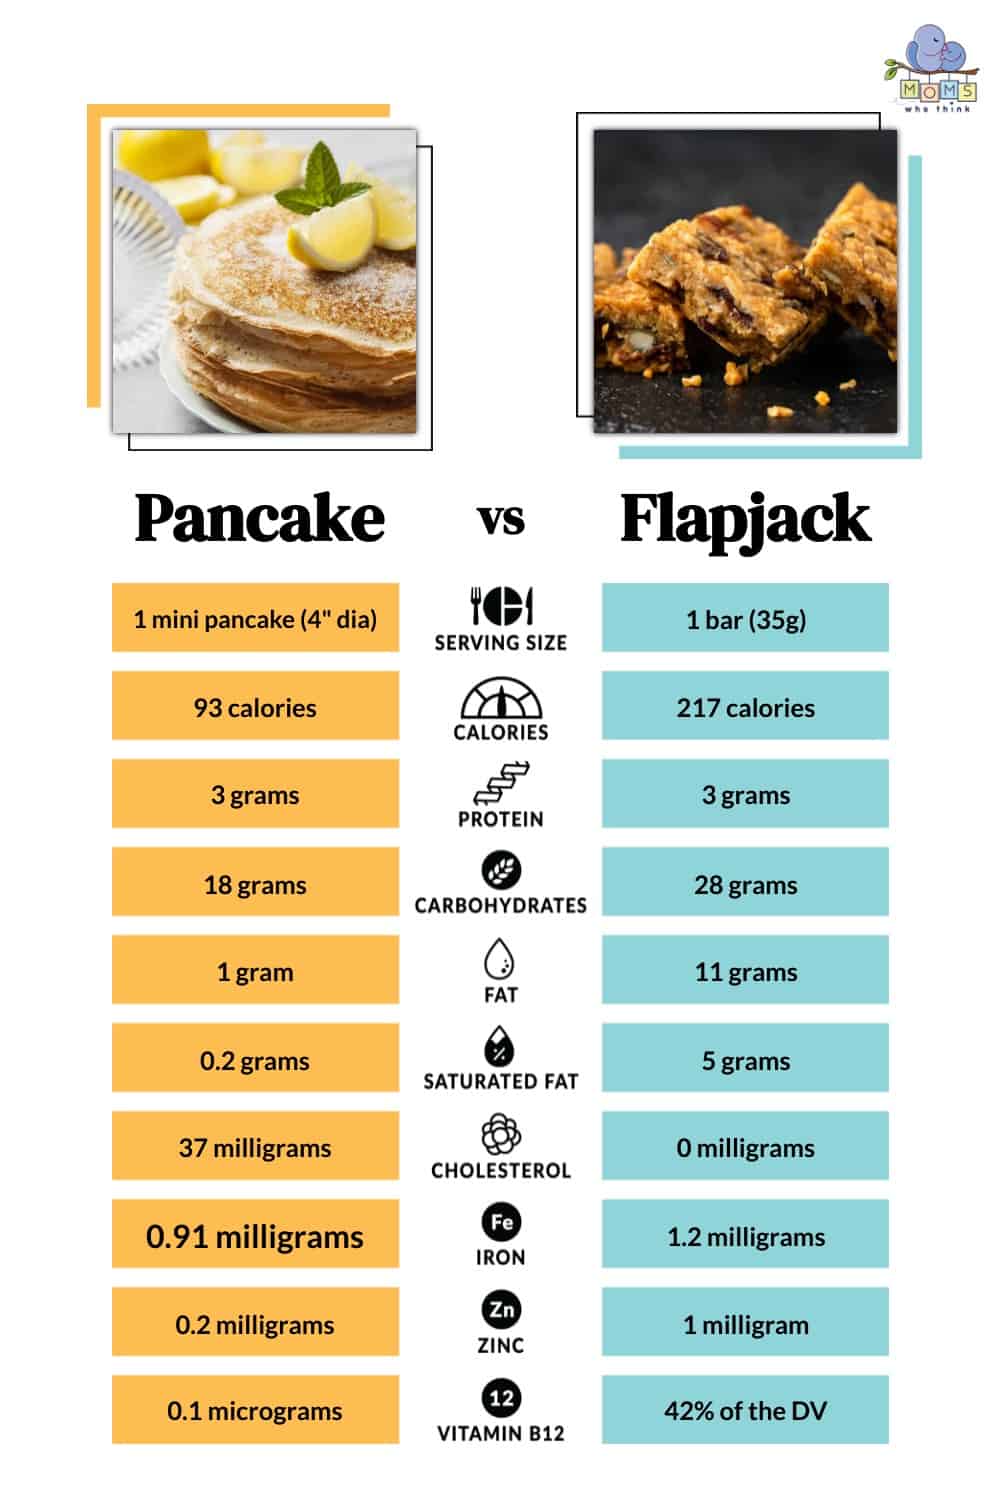 Pancake vs Flapjack: Which is Healthier